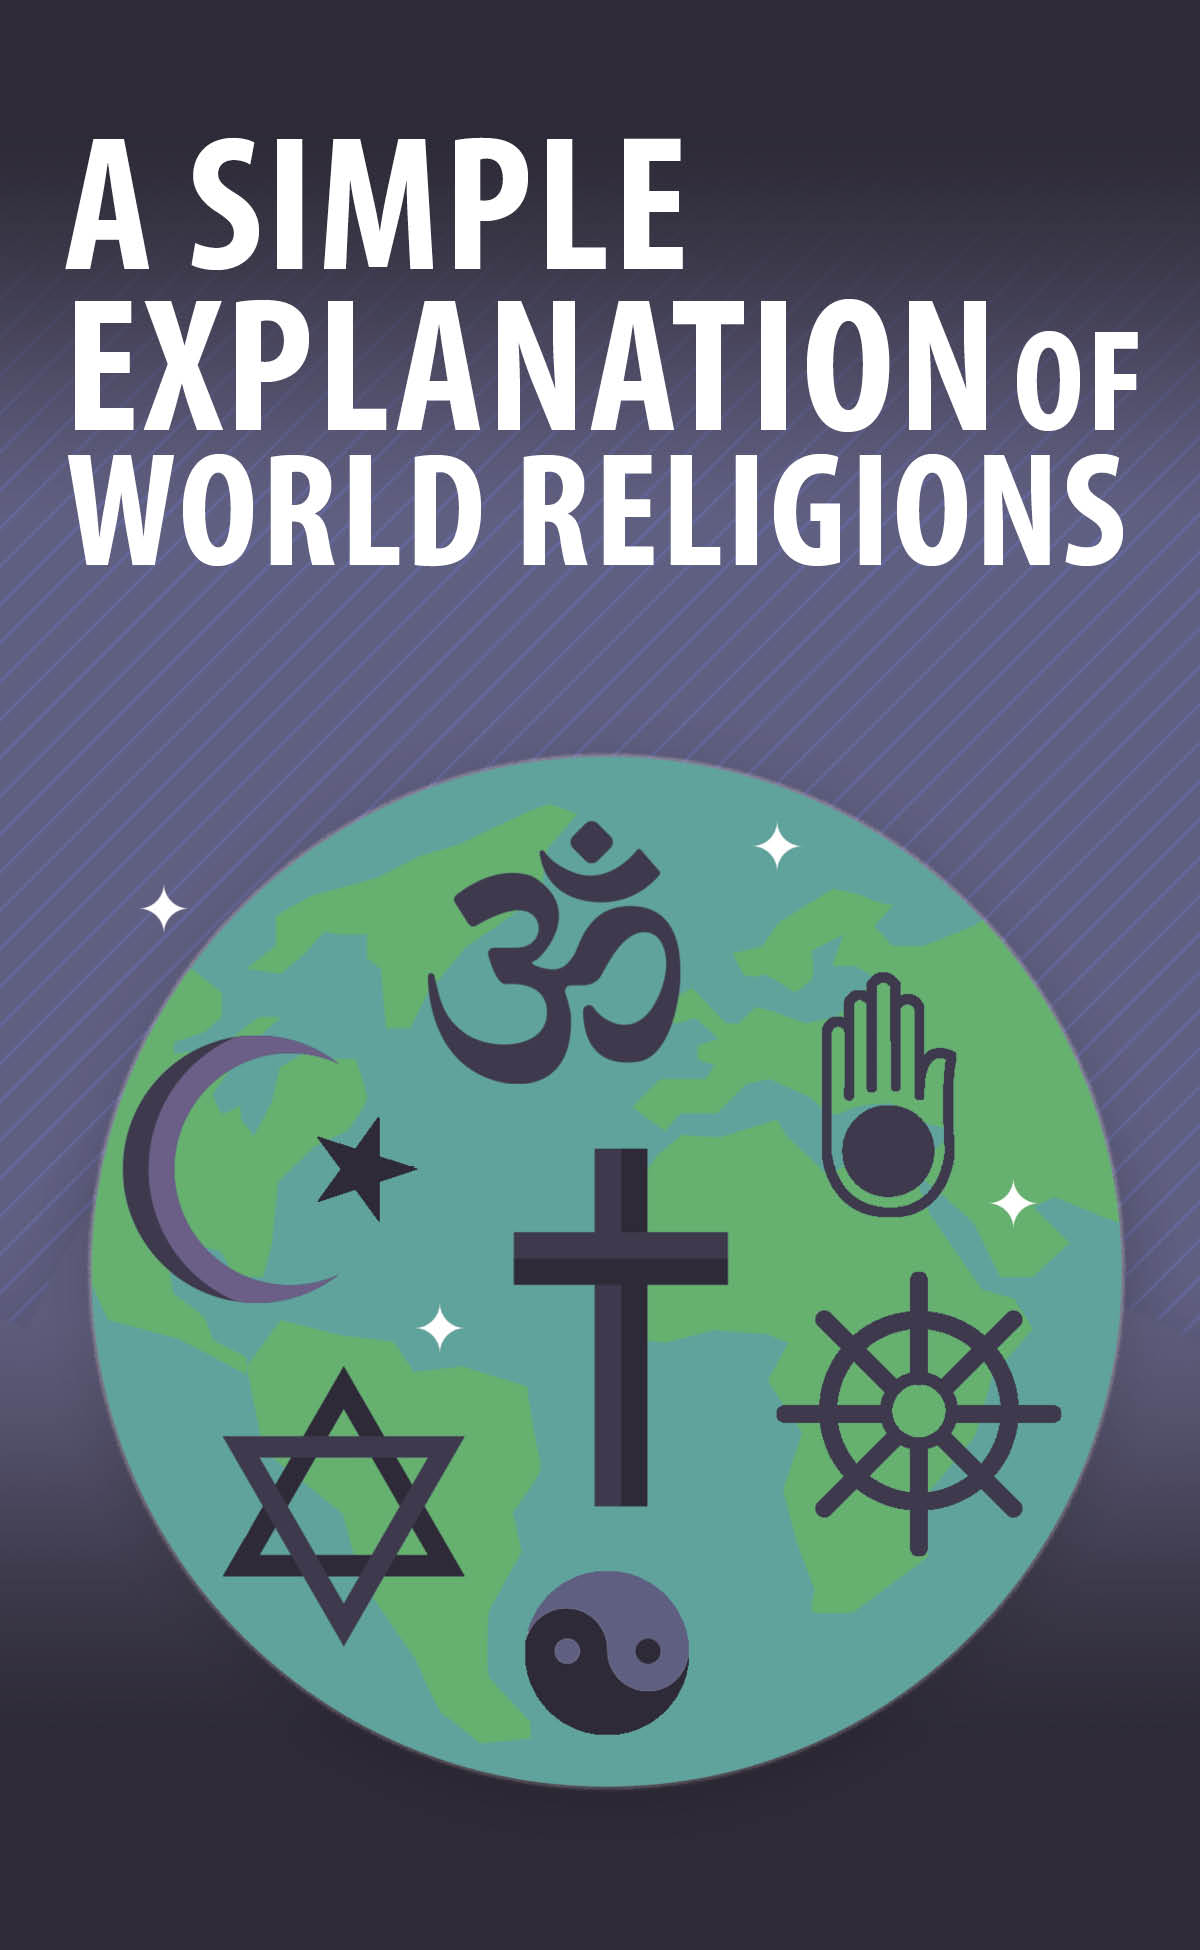 A Simple Explanation of World Religions